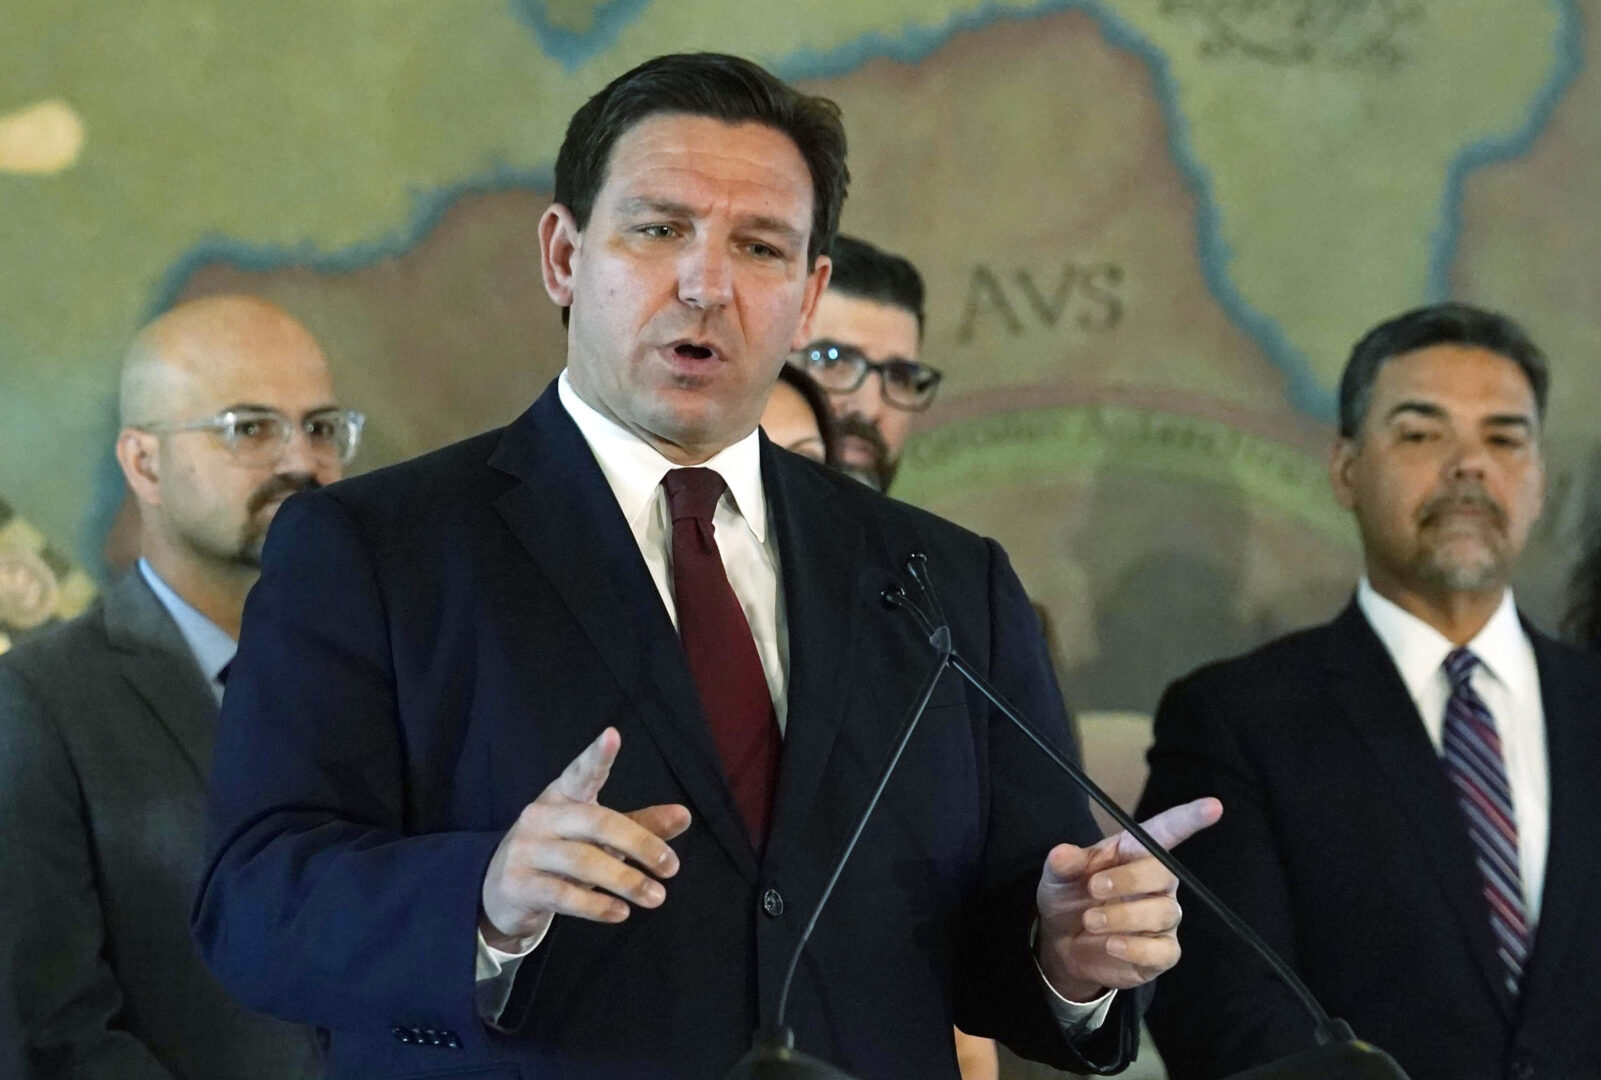 FILE - Florida Gov. Ron DeSantis speaks at Miami's Freedom Tower, on Monday, May 9, 2022. A Florida law intended to punish social media platforms like Facebook and Twitter is an unconstitutional violation of the First Amendment, a federal appeals court ruled Monday, May 23, 2022, dealing a major victory to companies who had been accused by DeSantis of discriminating against conservative thought. (AP Photo/Marta Lavandier, File)